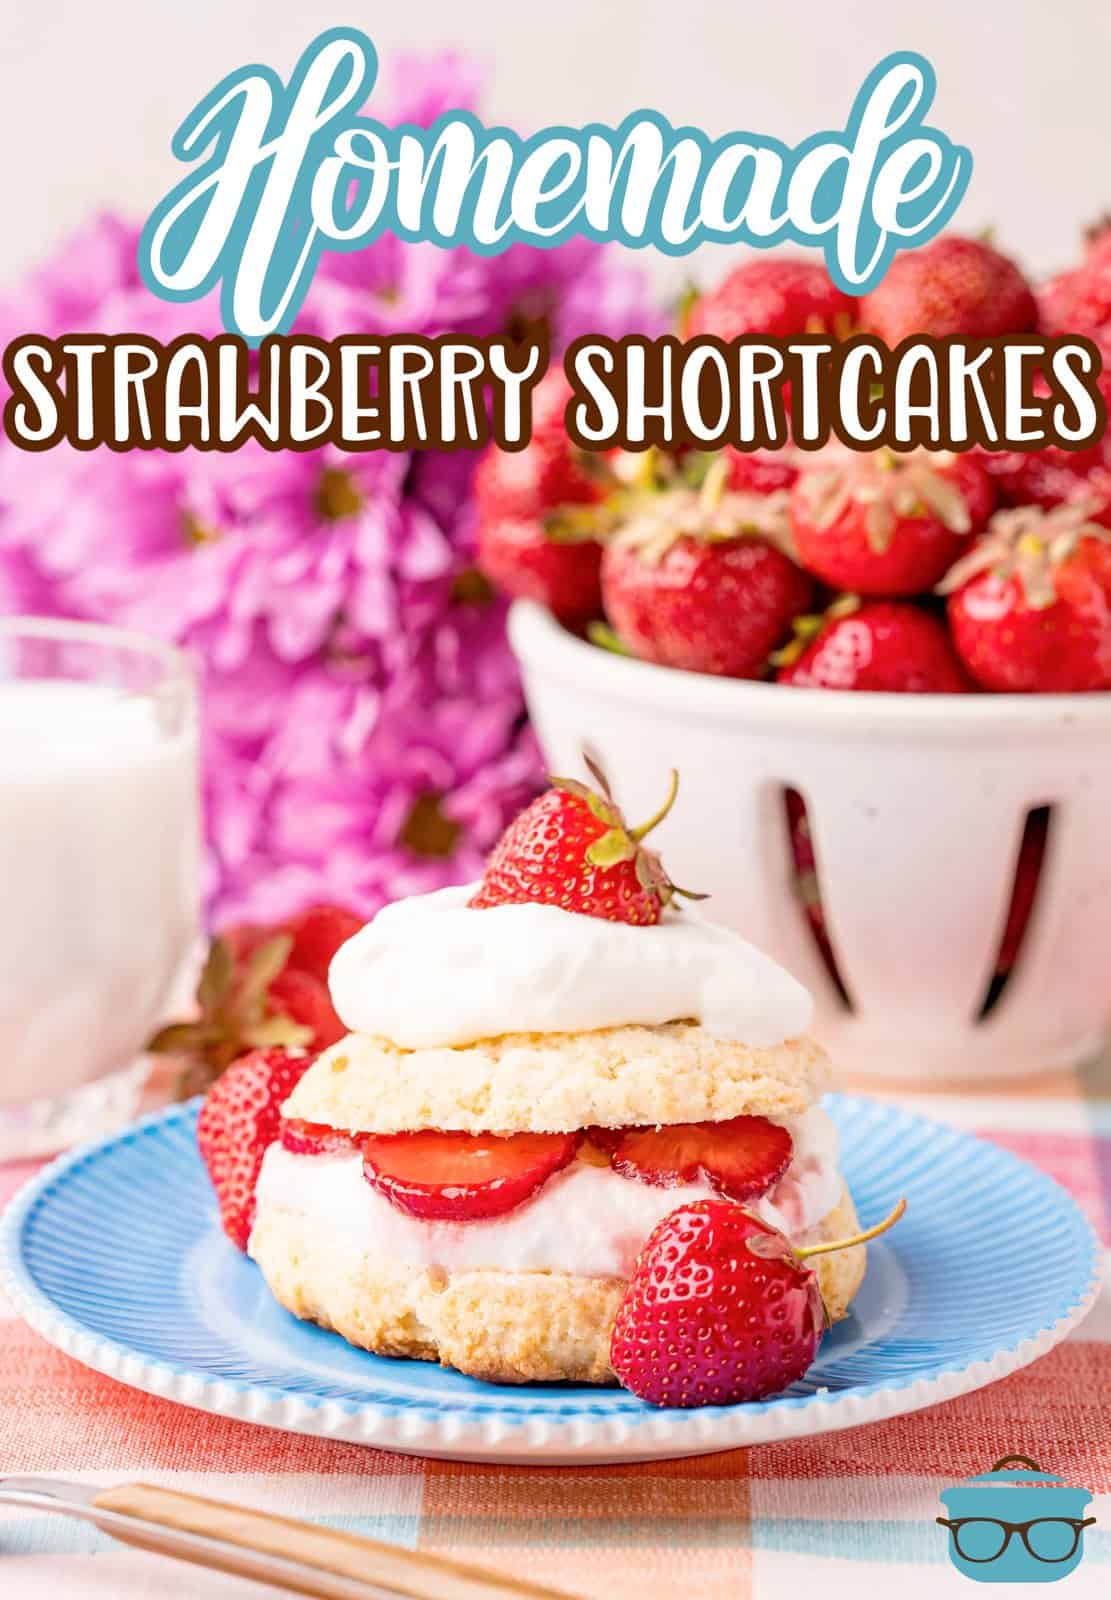 strawberry shortcake shown on round blue plate with a bowl of fresh strawberries shown behind it. 